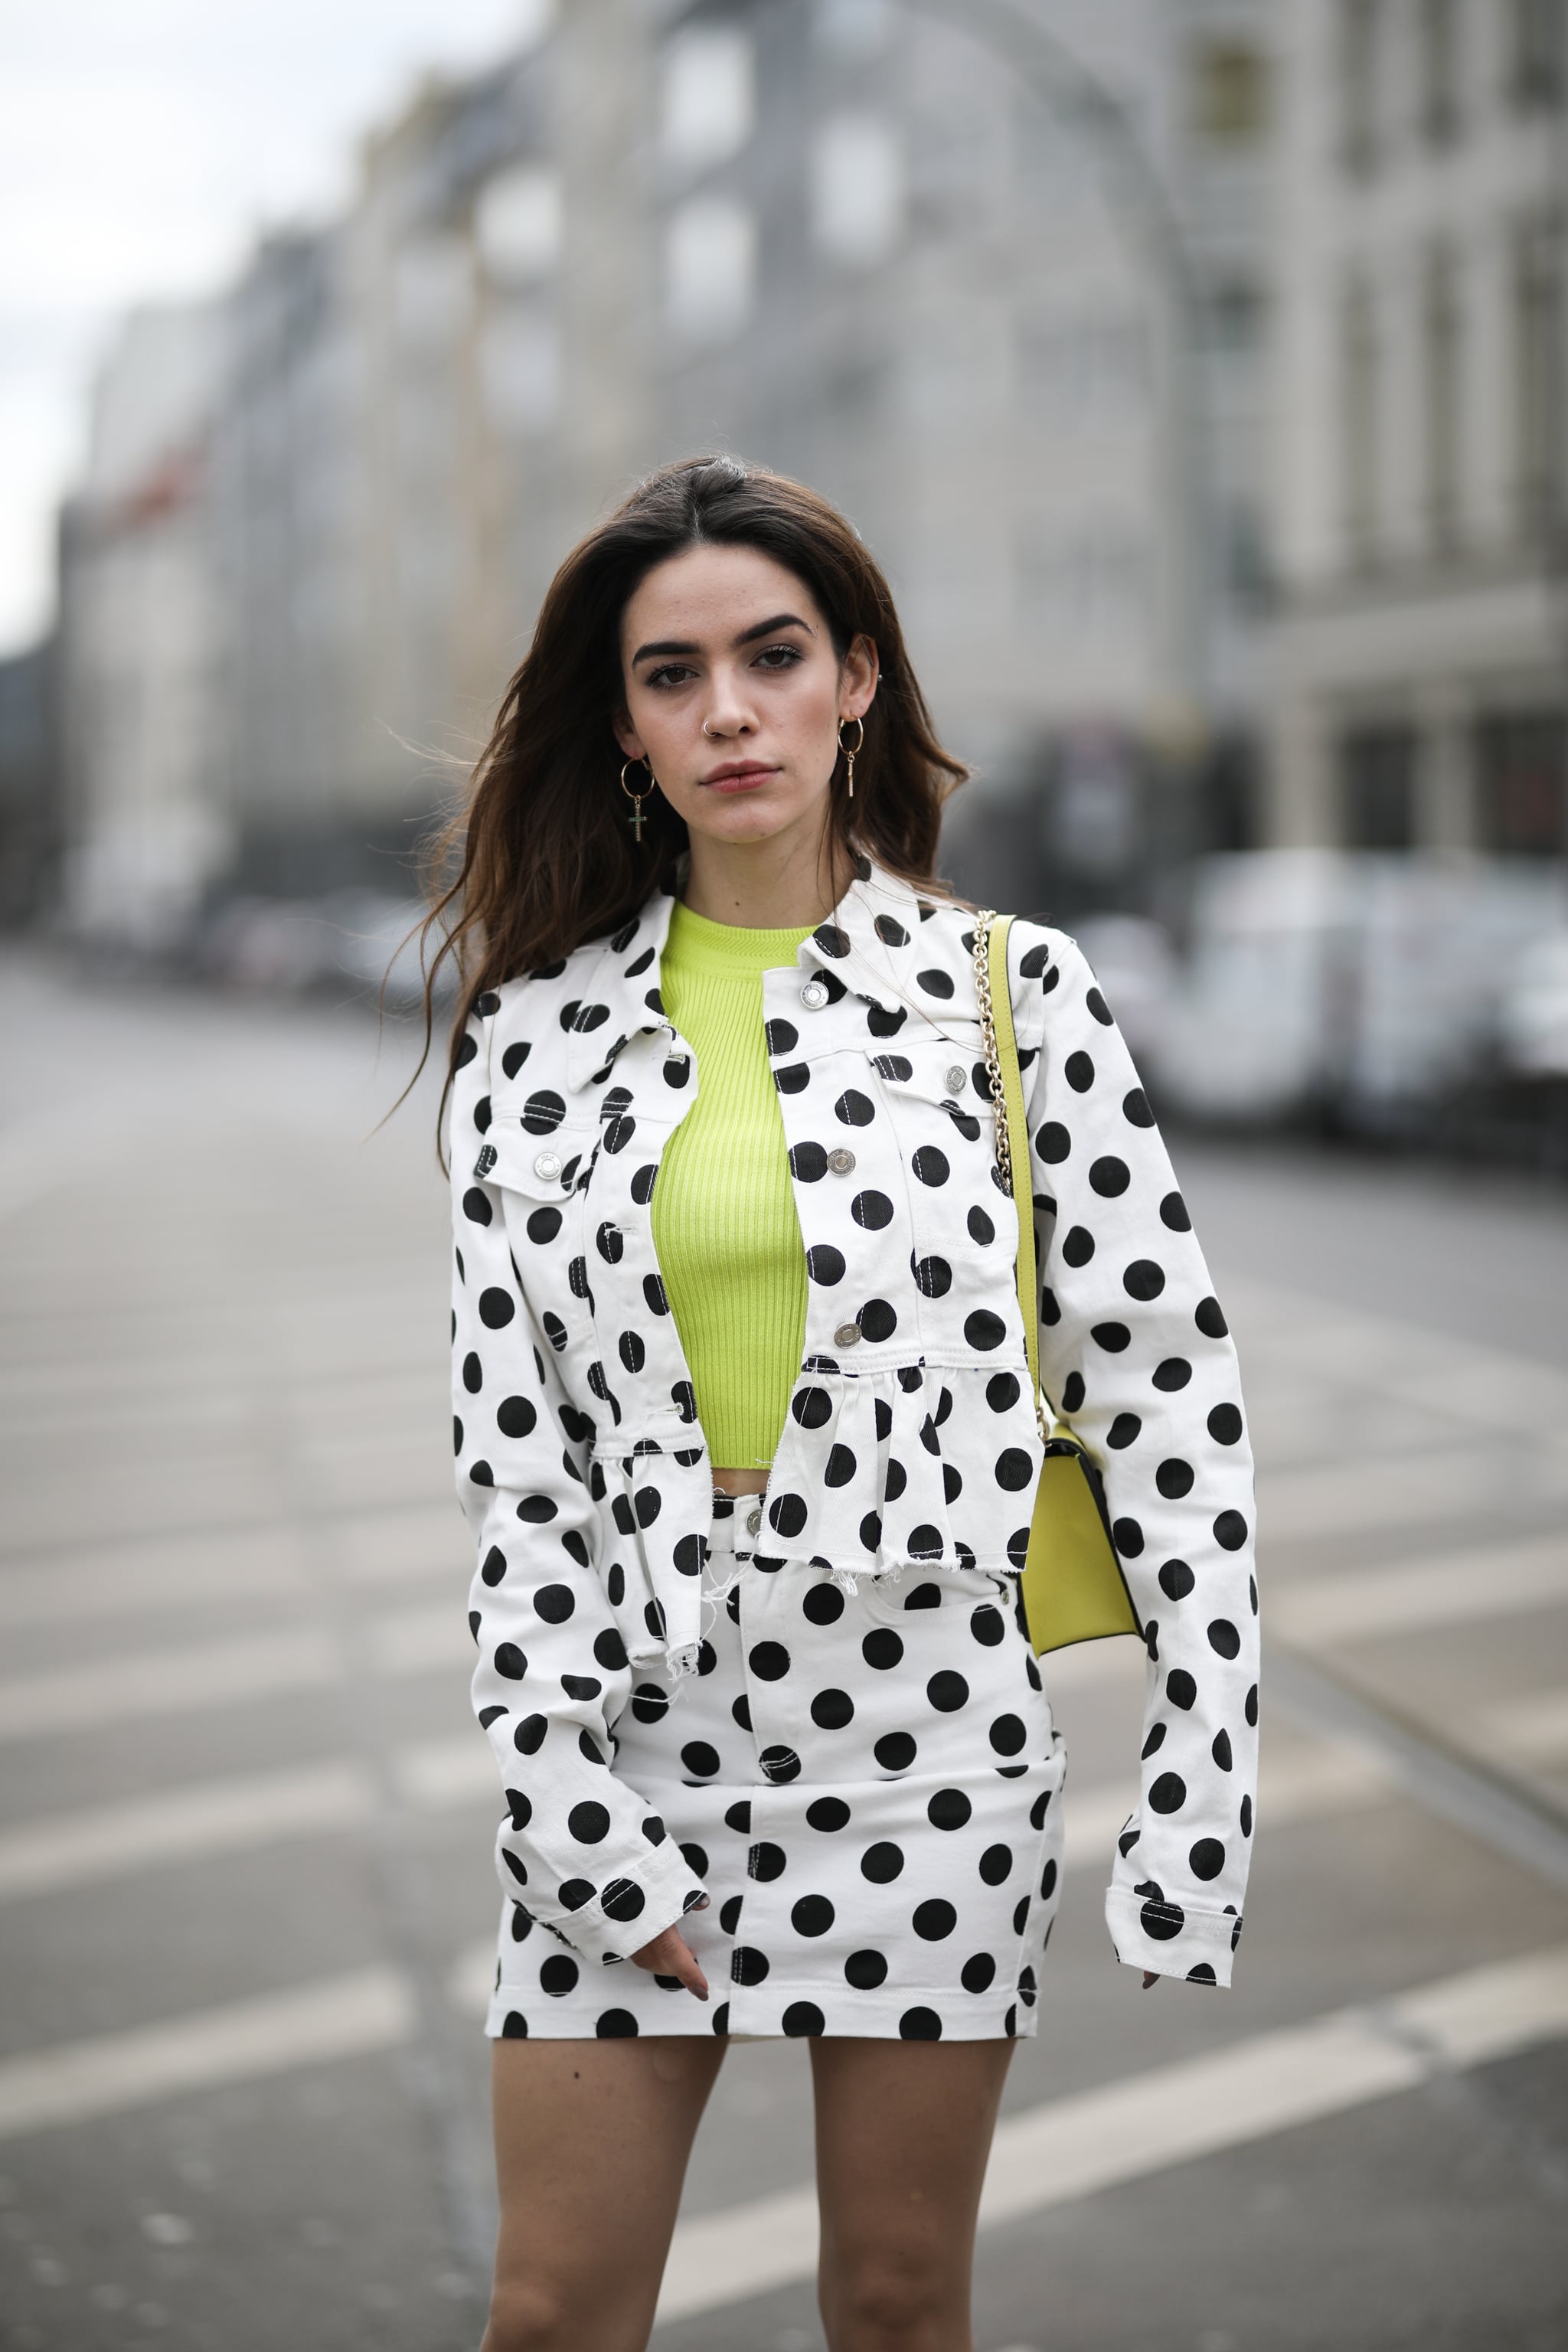 Polka Dots Outfit Ideas